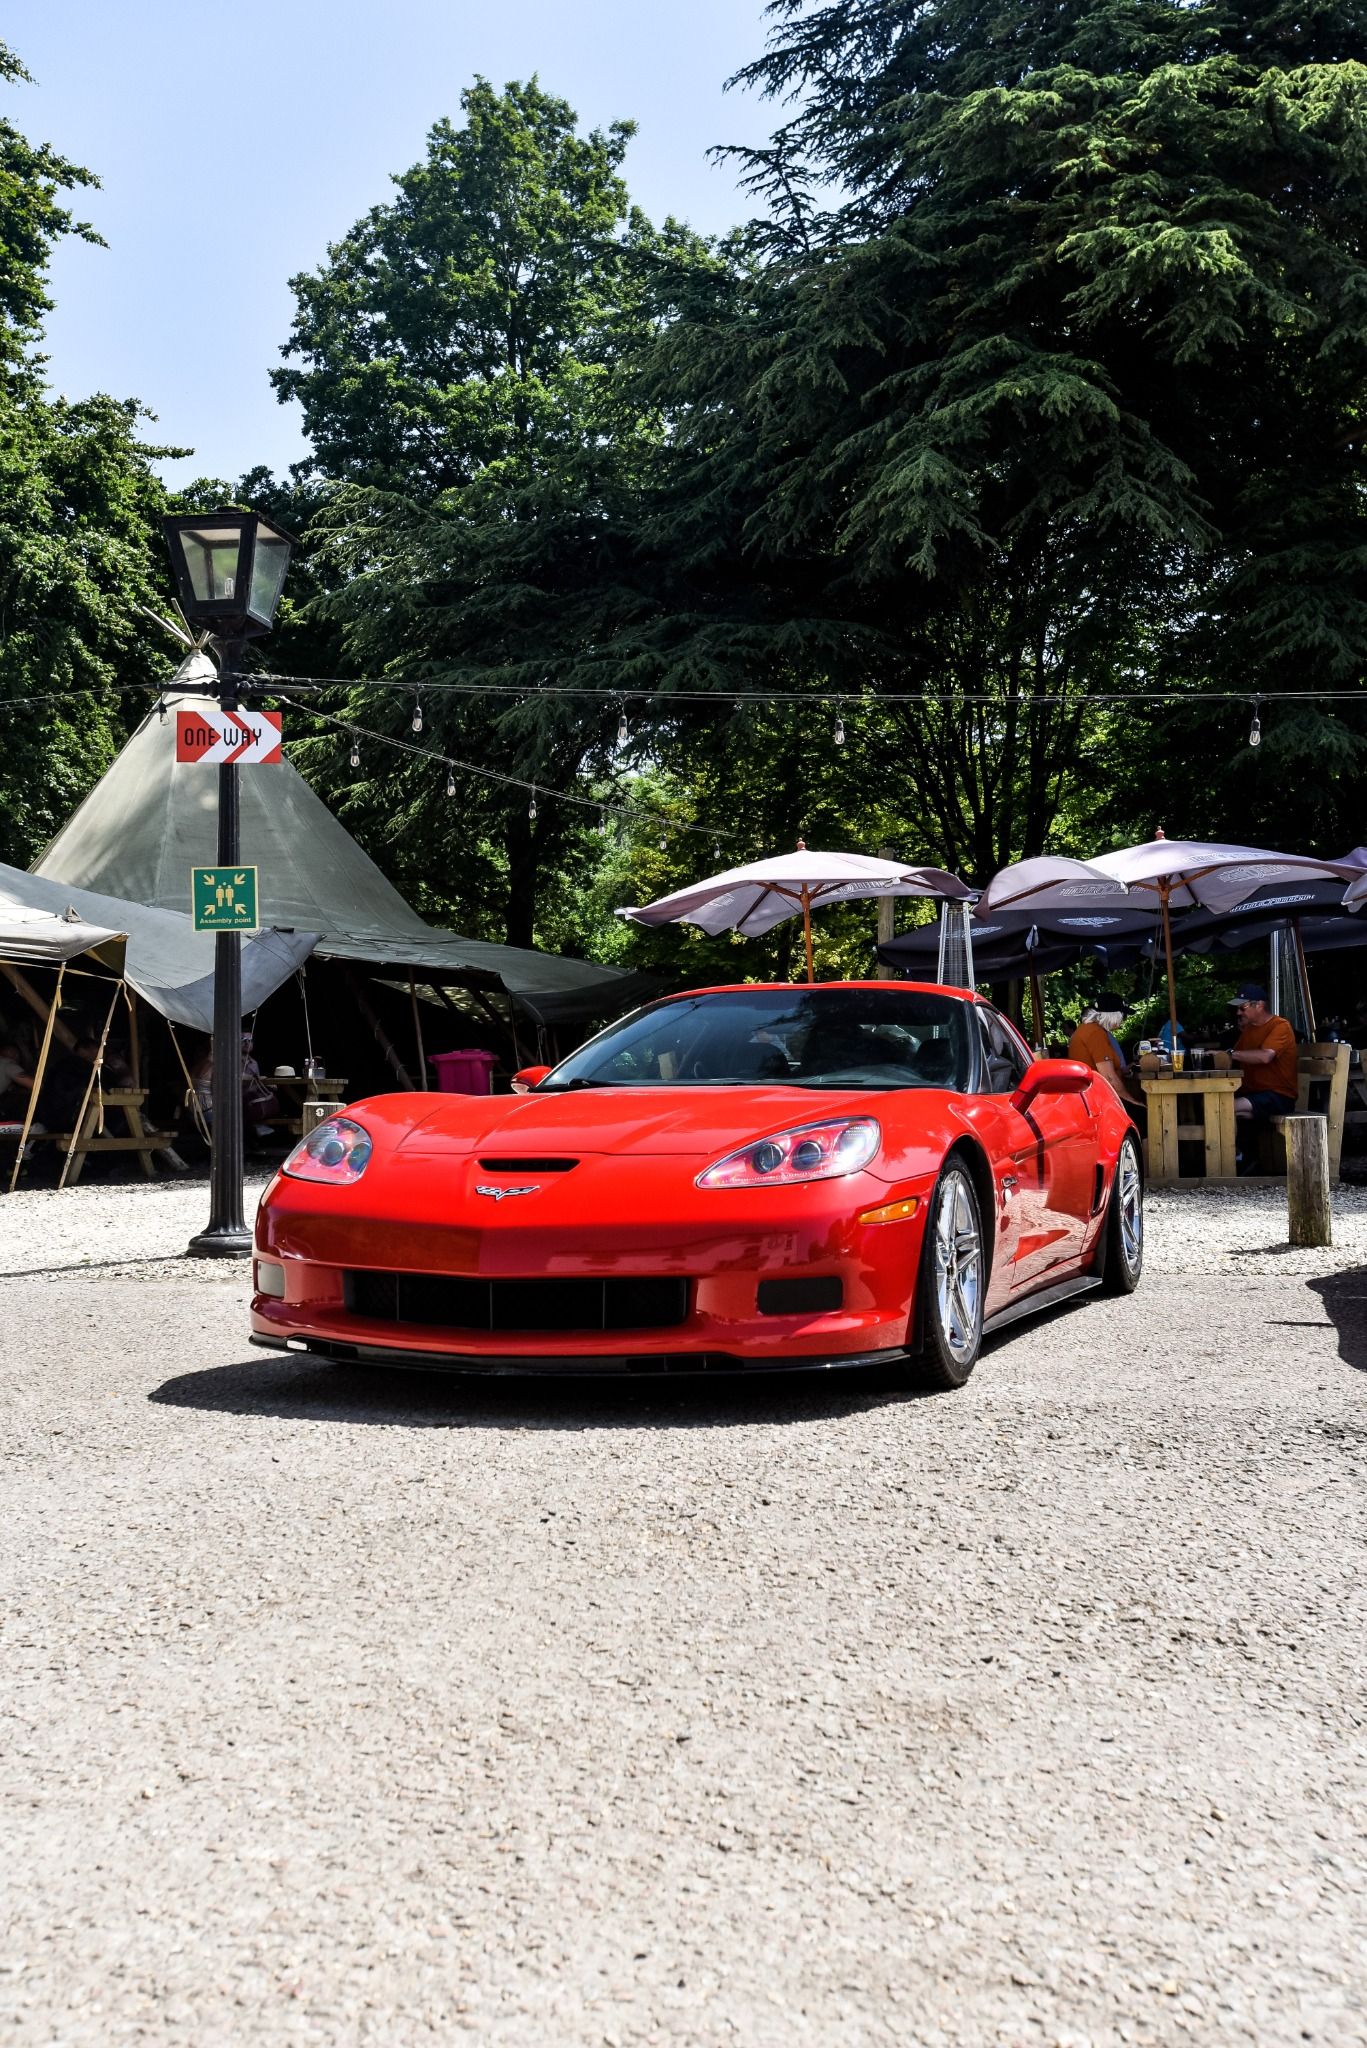 Low angle of a red sports car with picnic benches in the background